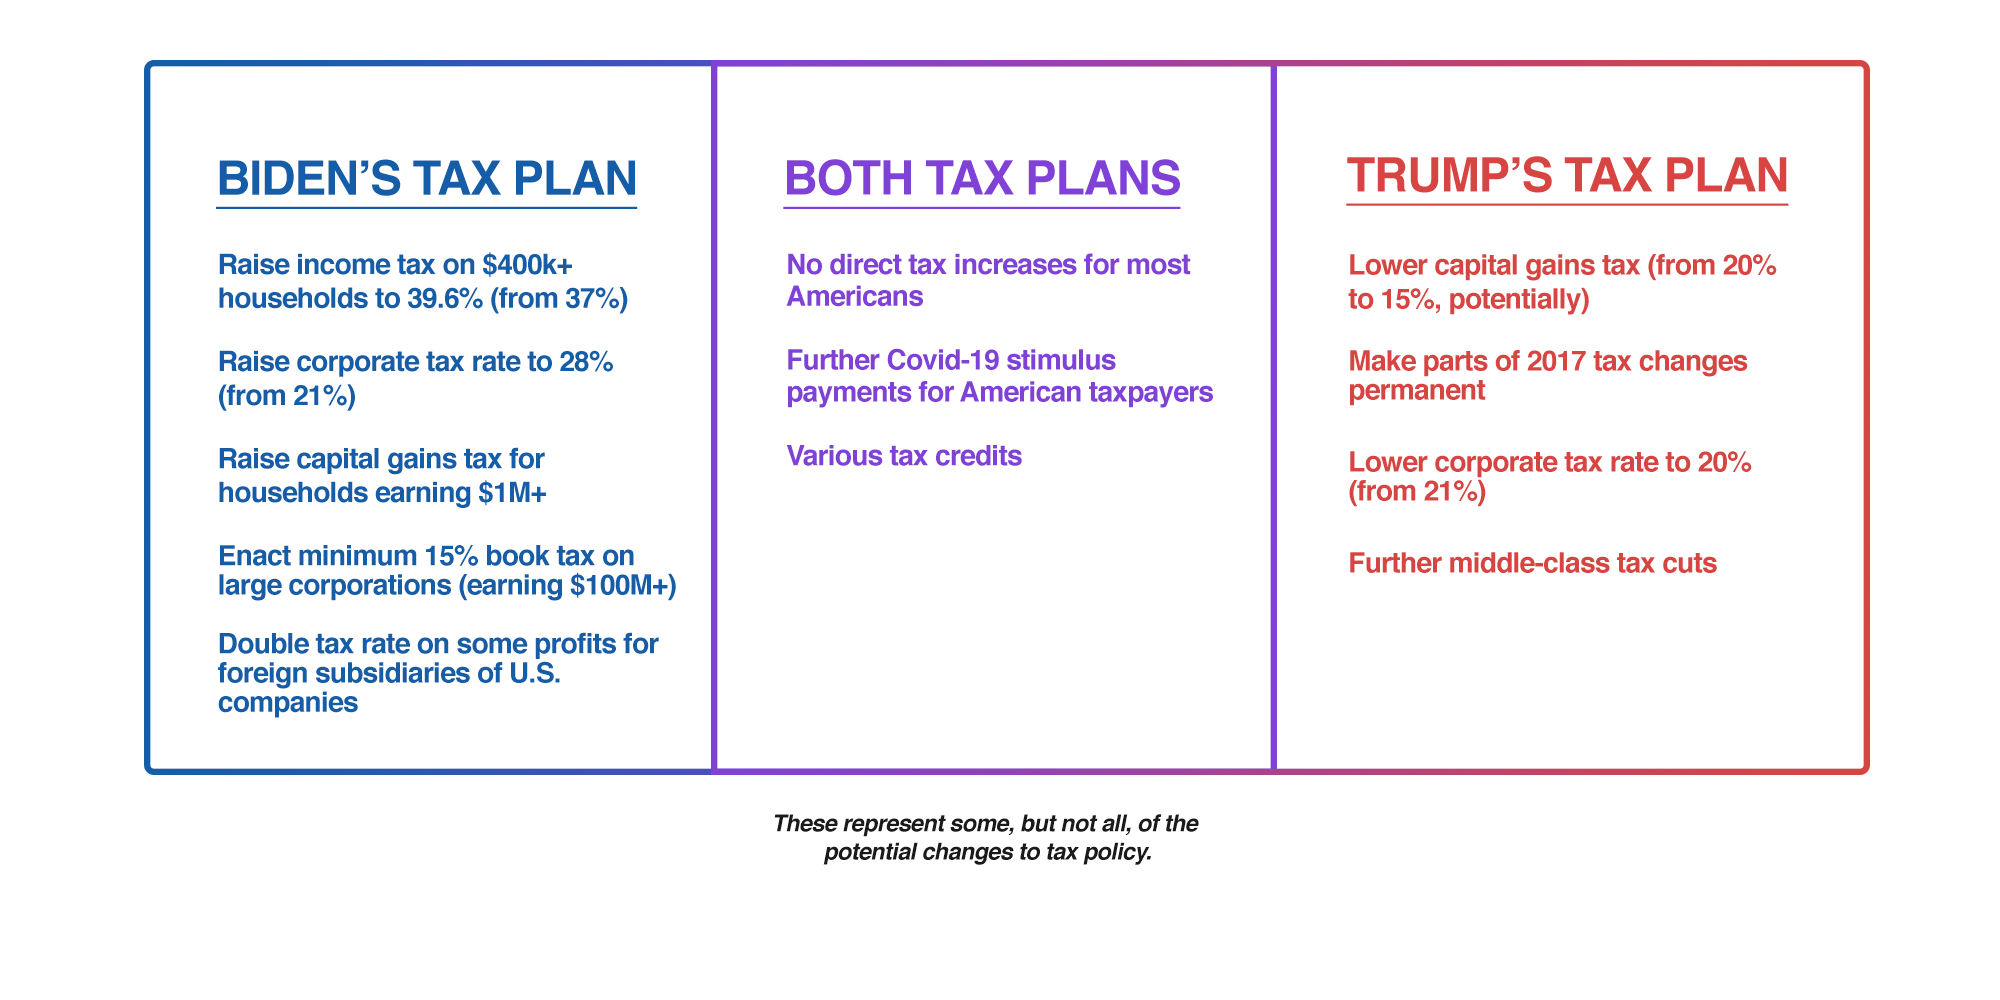 How Will Trump and Biden’s Tax Plans Affect Americans?